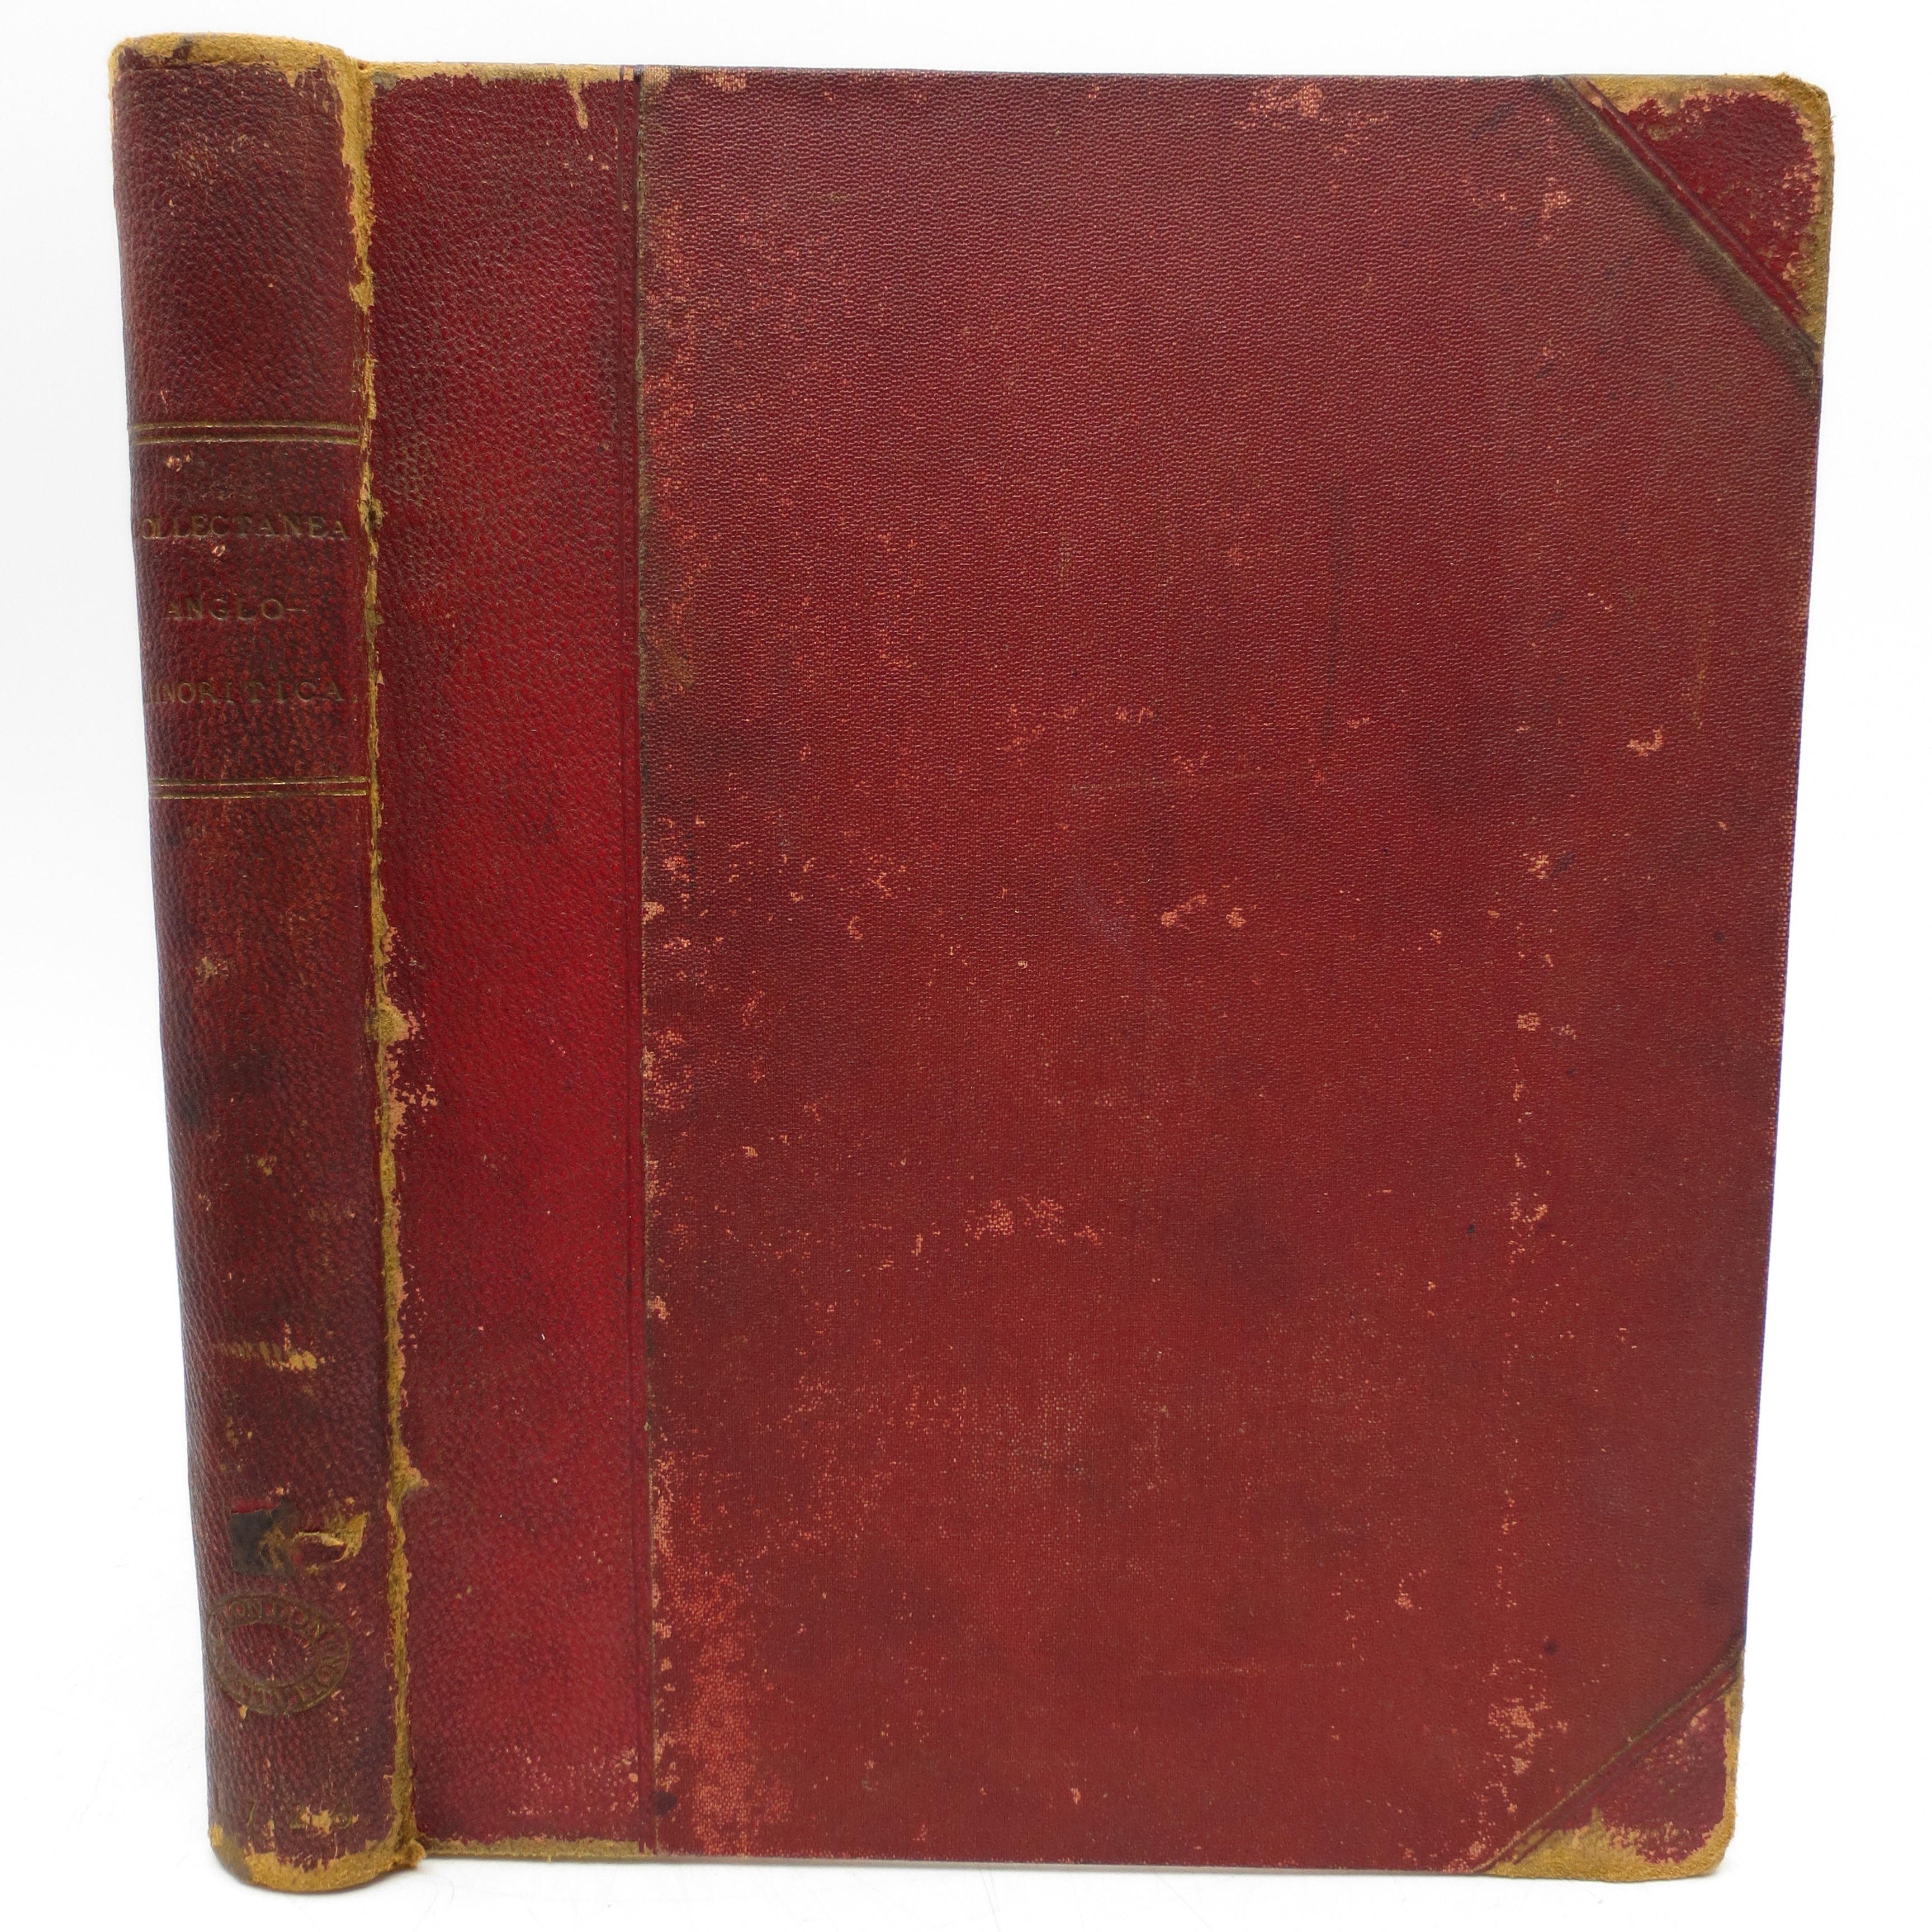 Collectanea Anglo-Minoritica, or A Collection of the Antiquities of the English Franciscans, or Friers Minors, commonly called Gray Friers. In Two Parts. With an Appendix concerning the English Nuns of the Order of Saint Clare (FIRST EDITION) - A. P. Parkinson (Compiler)